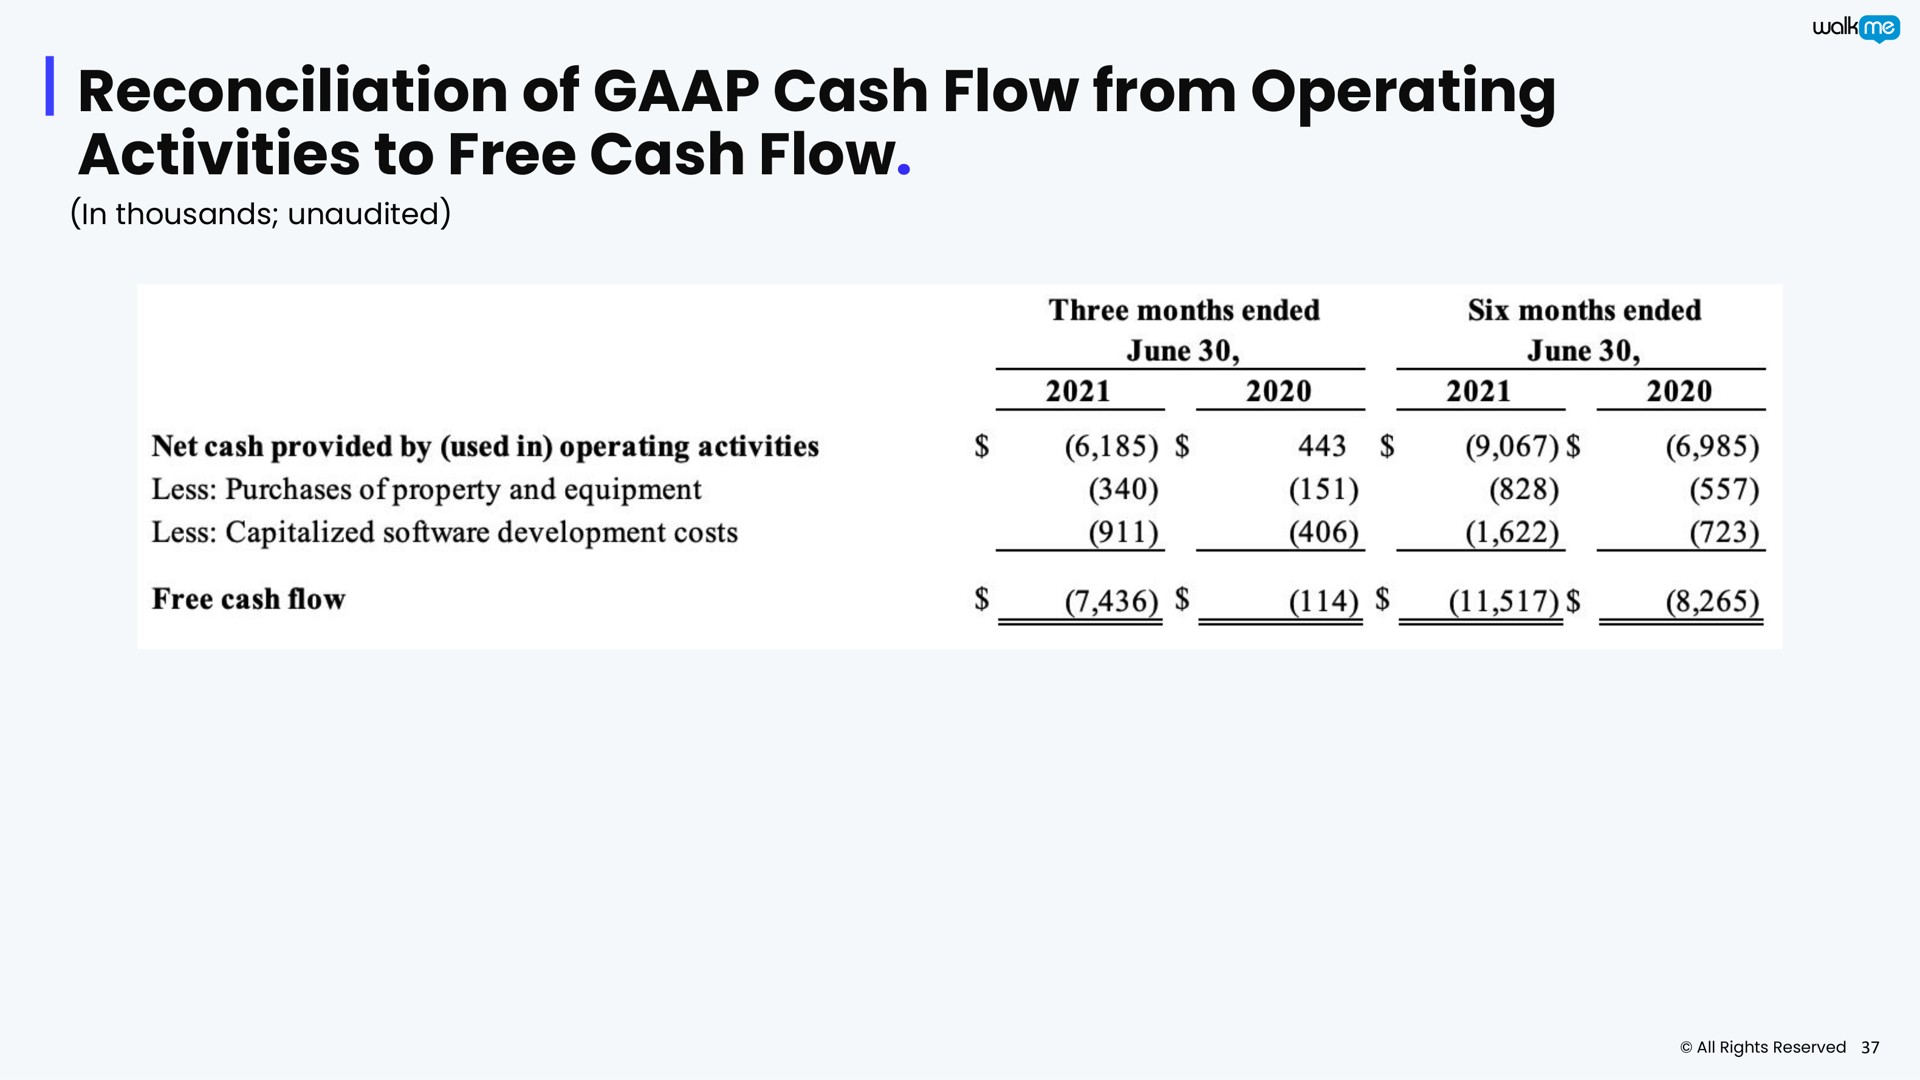 reconciliation of cash flow from operating activities to free cash flow | Walkme